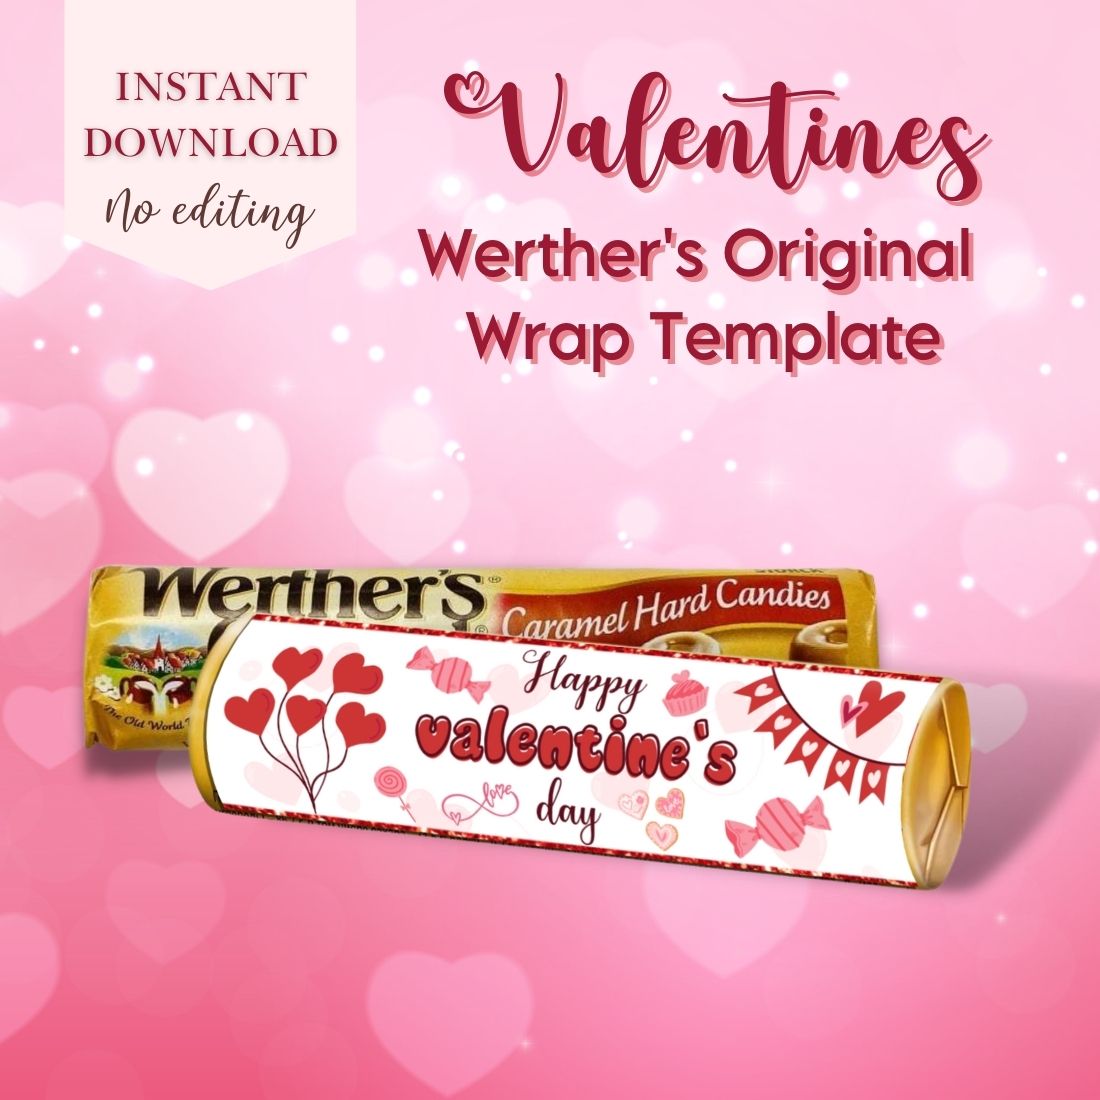 Valentines Werther's Original Wrap Template cover image.